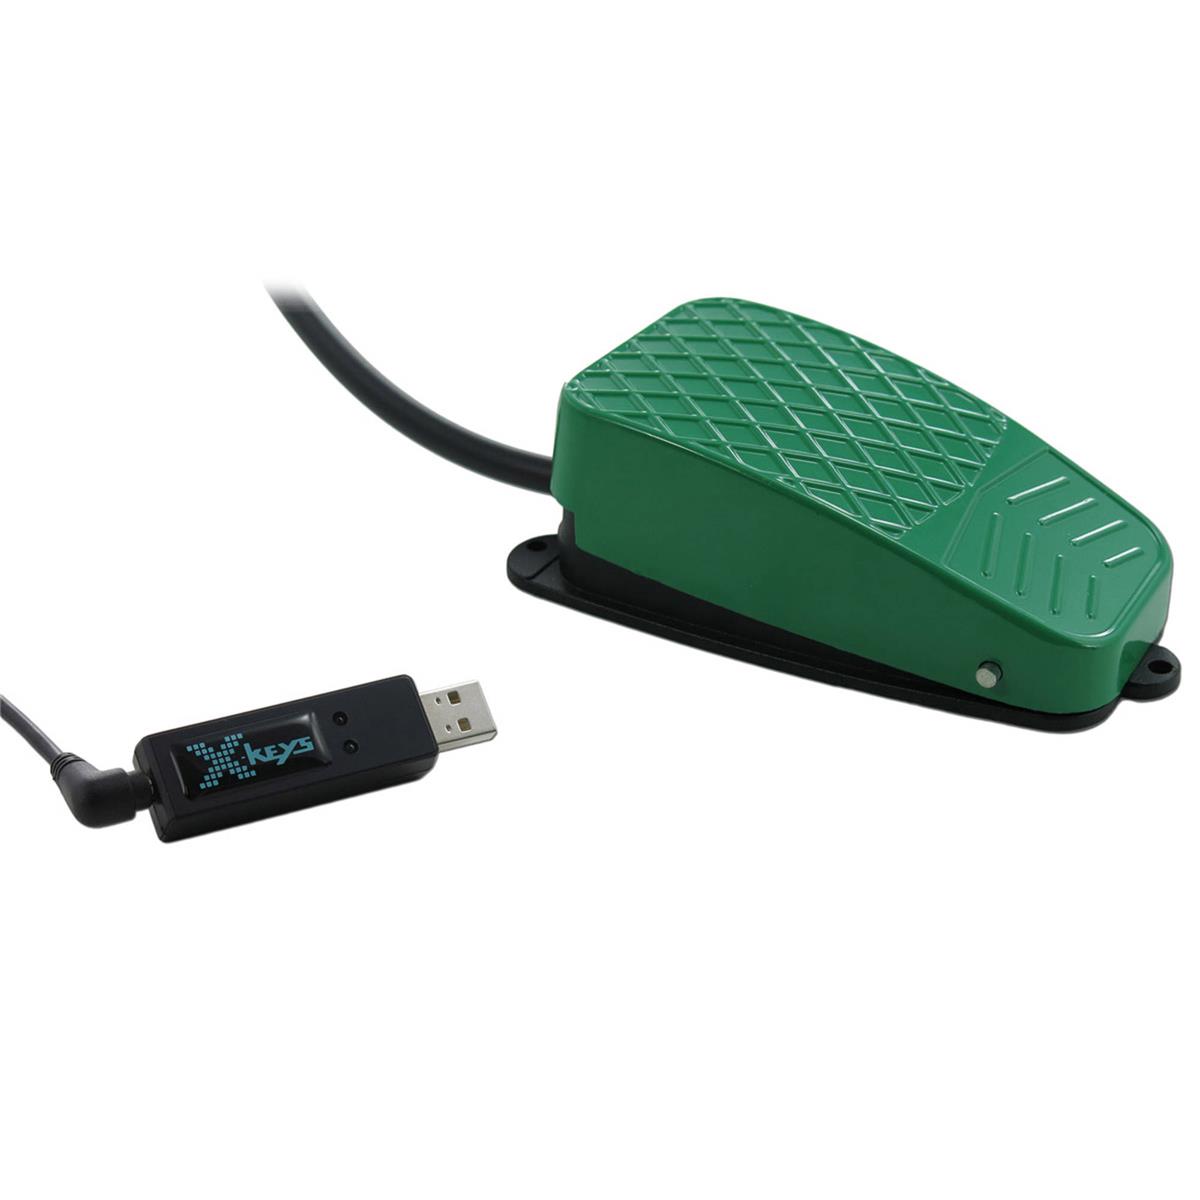 Image of X-Keys USB Three-Switch Interface with Green Commercial Foot Switch